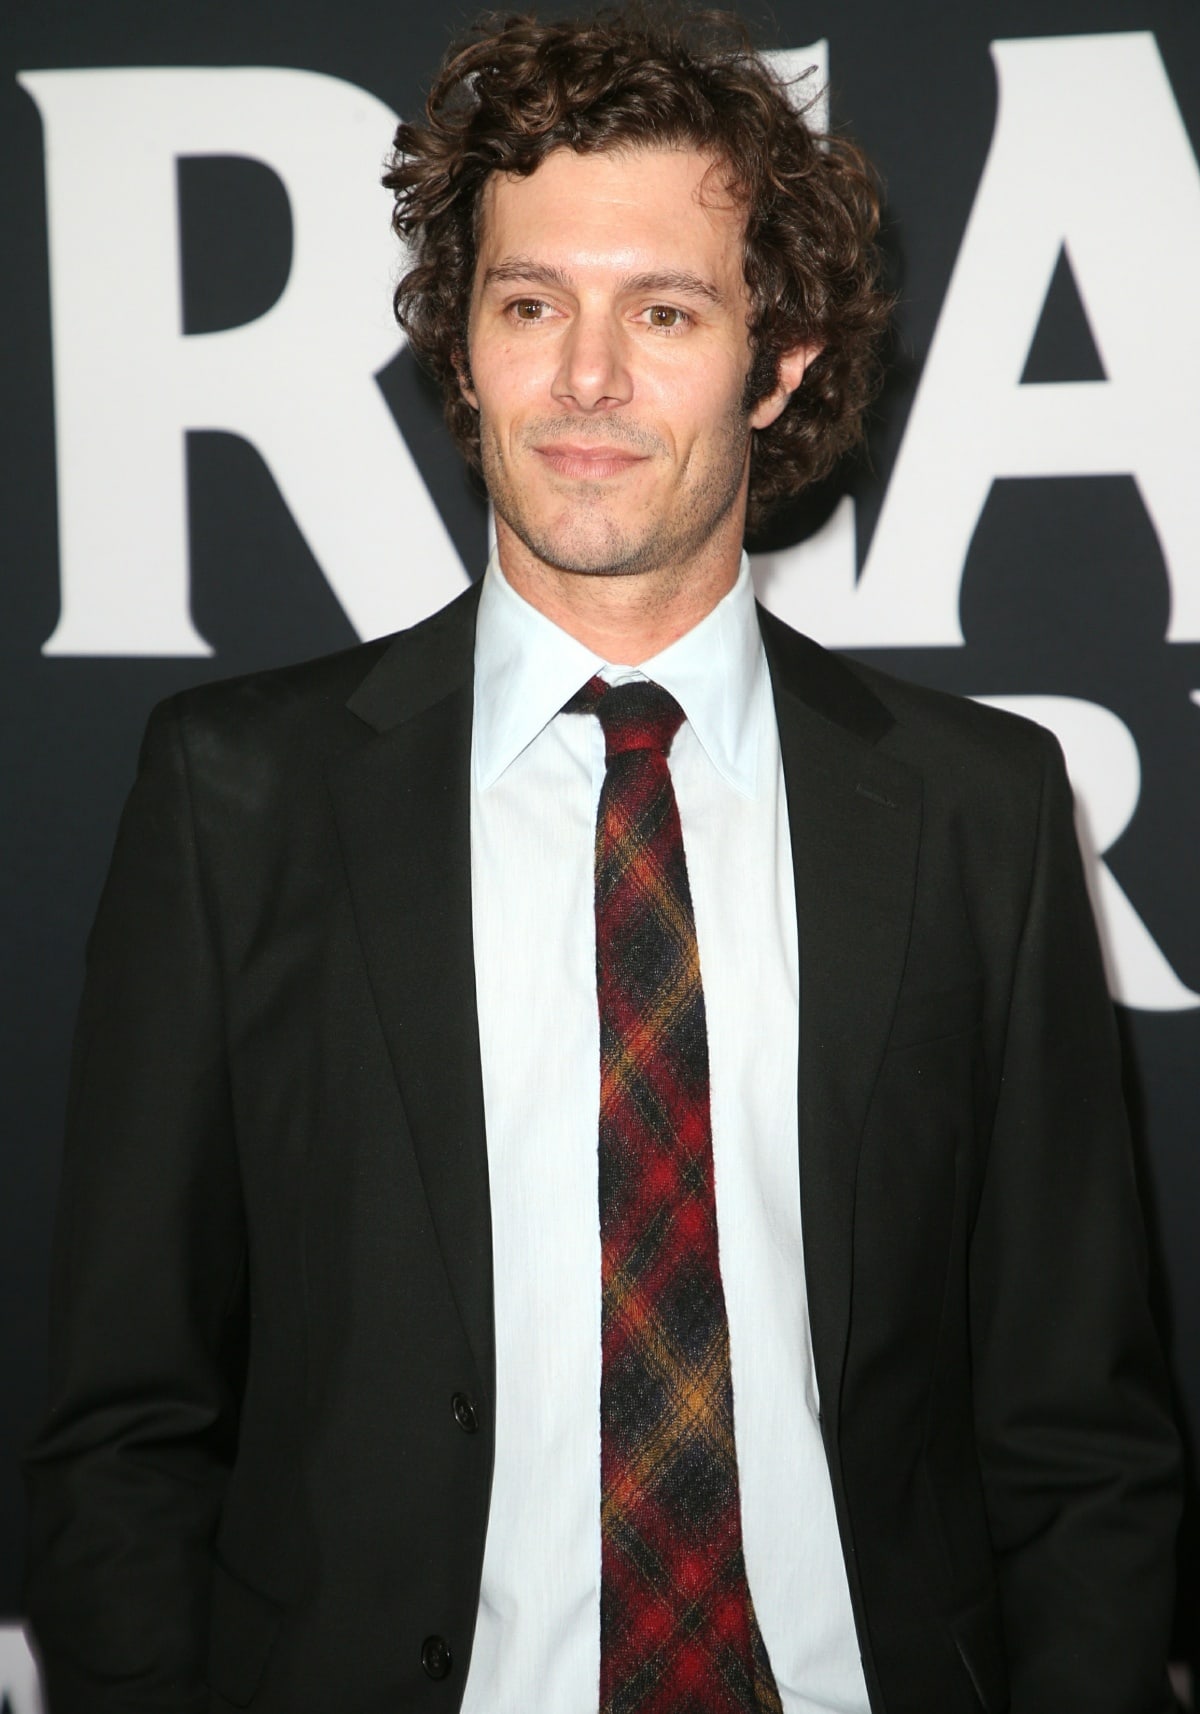 Adam Brody arriving on the red carpet for the premiere of Ready or Not